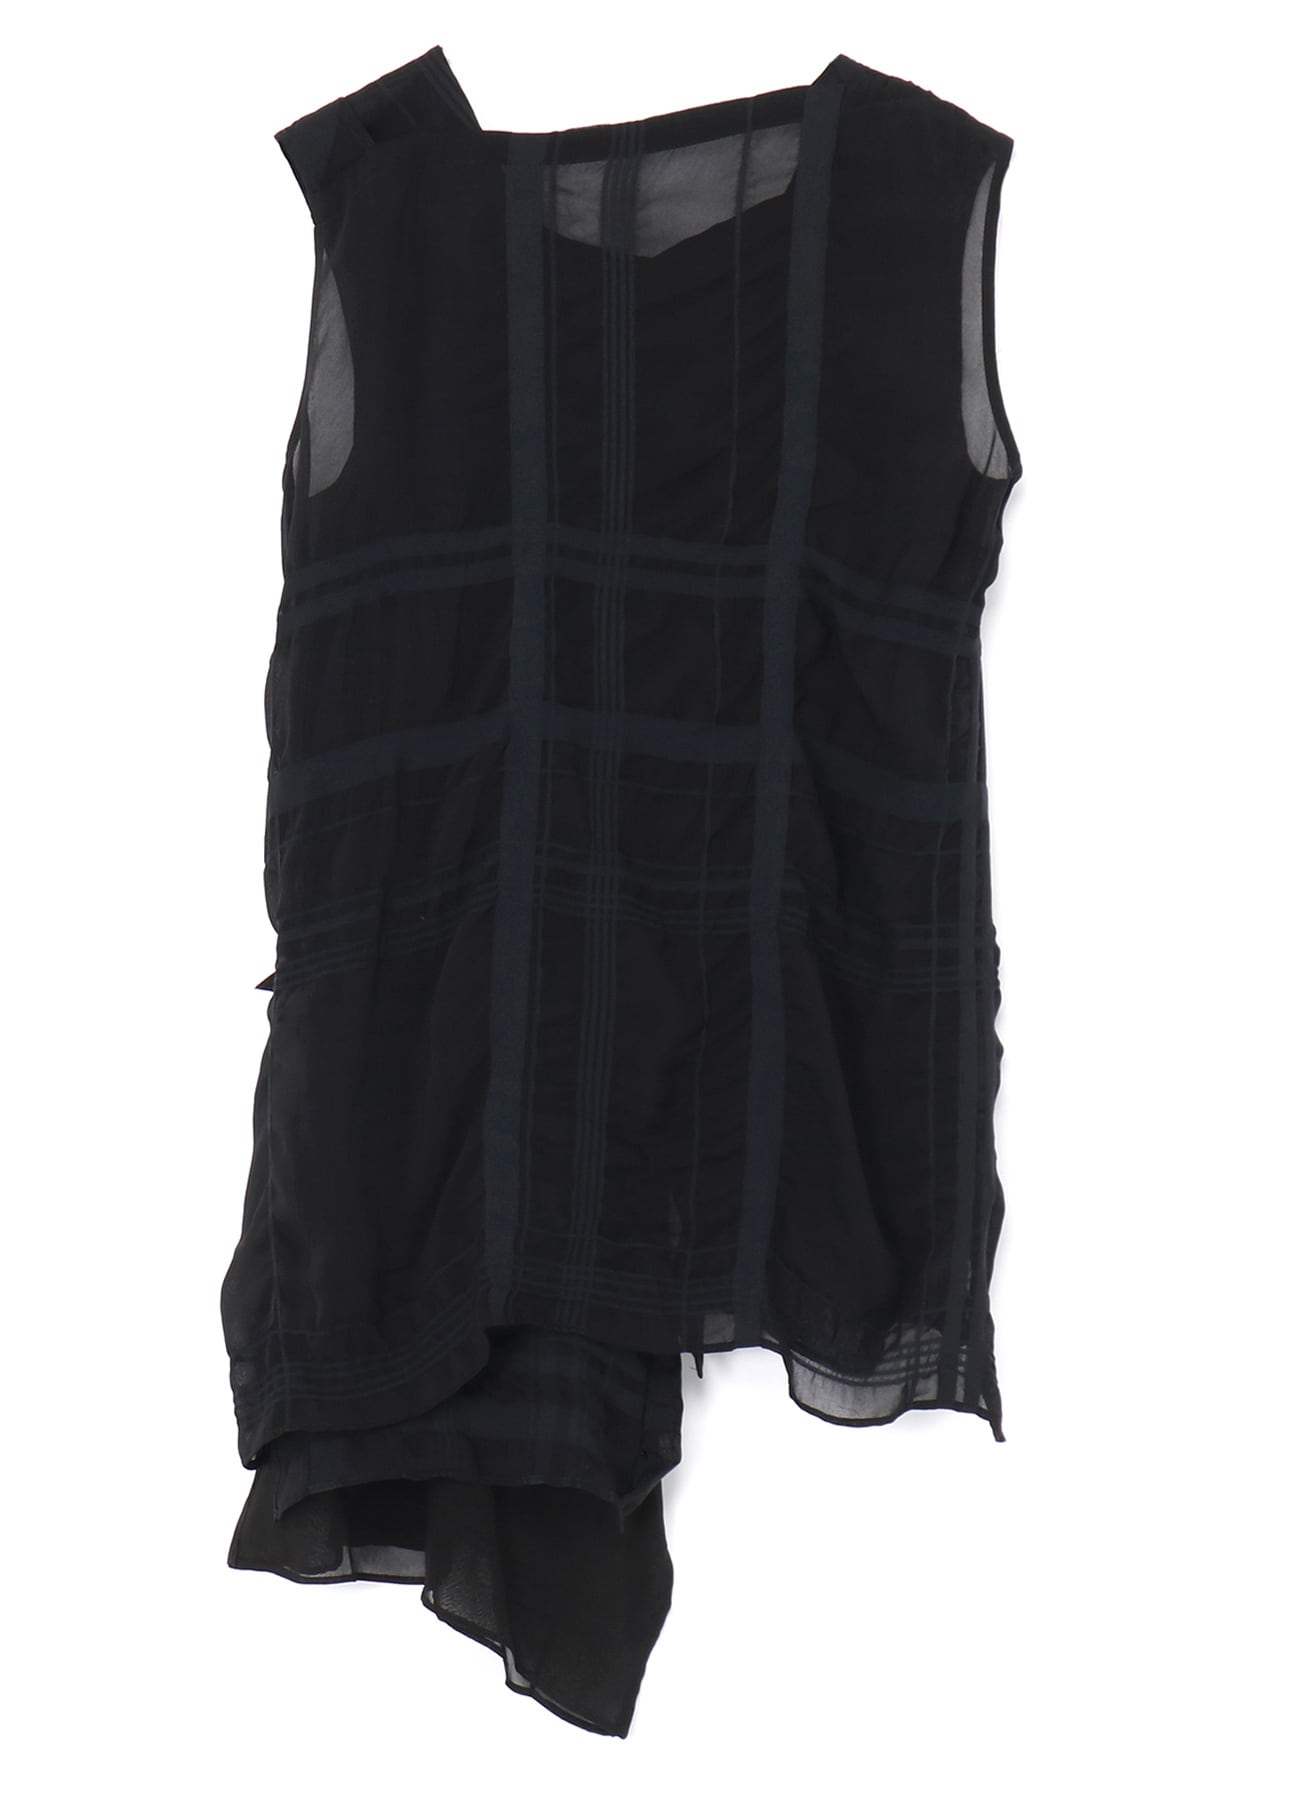 SLEEVELESS TOP WITH FLAP PANEL